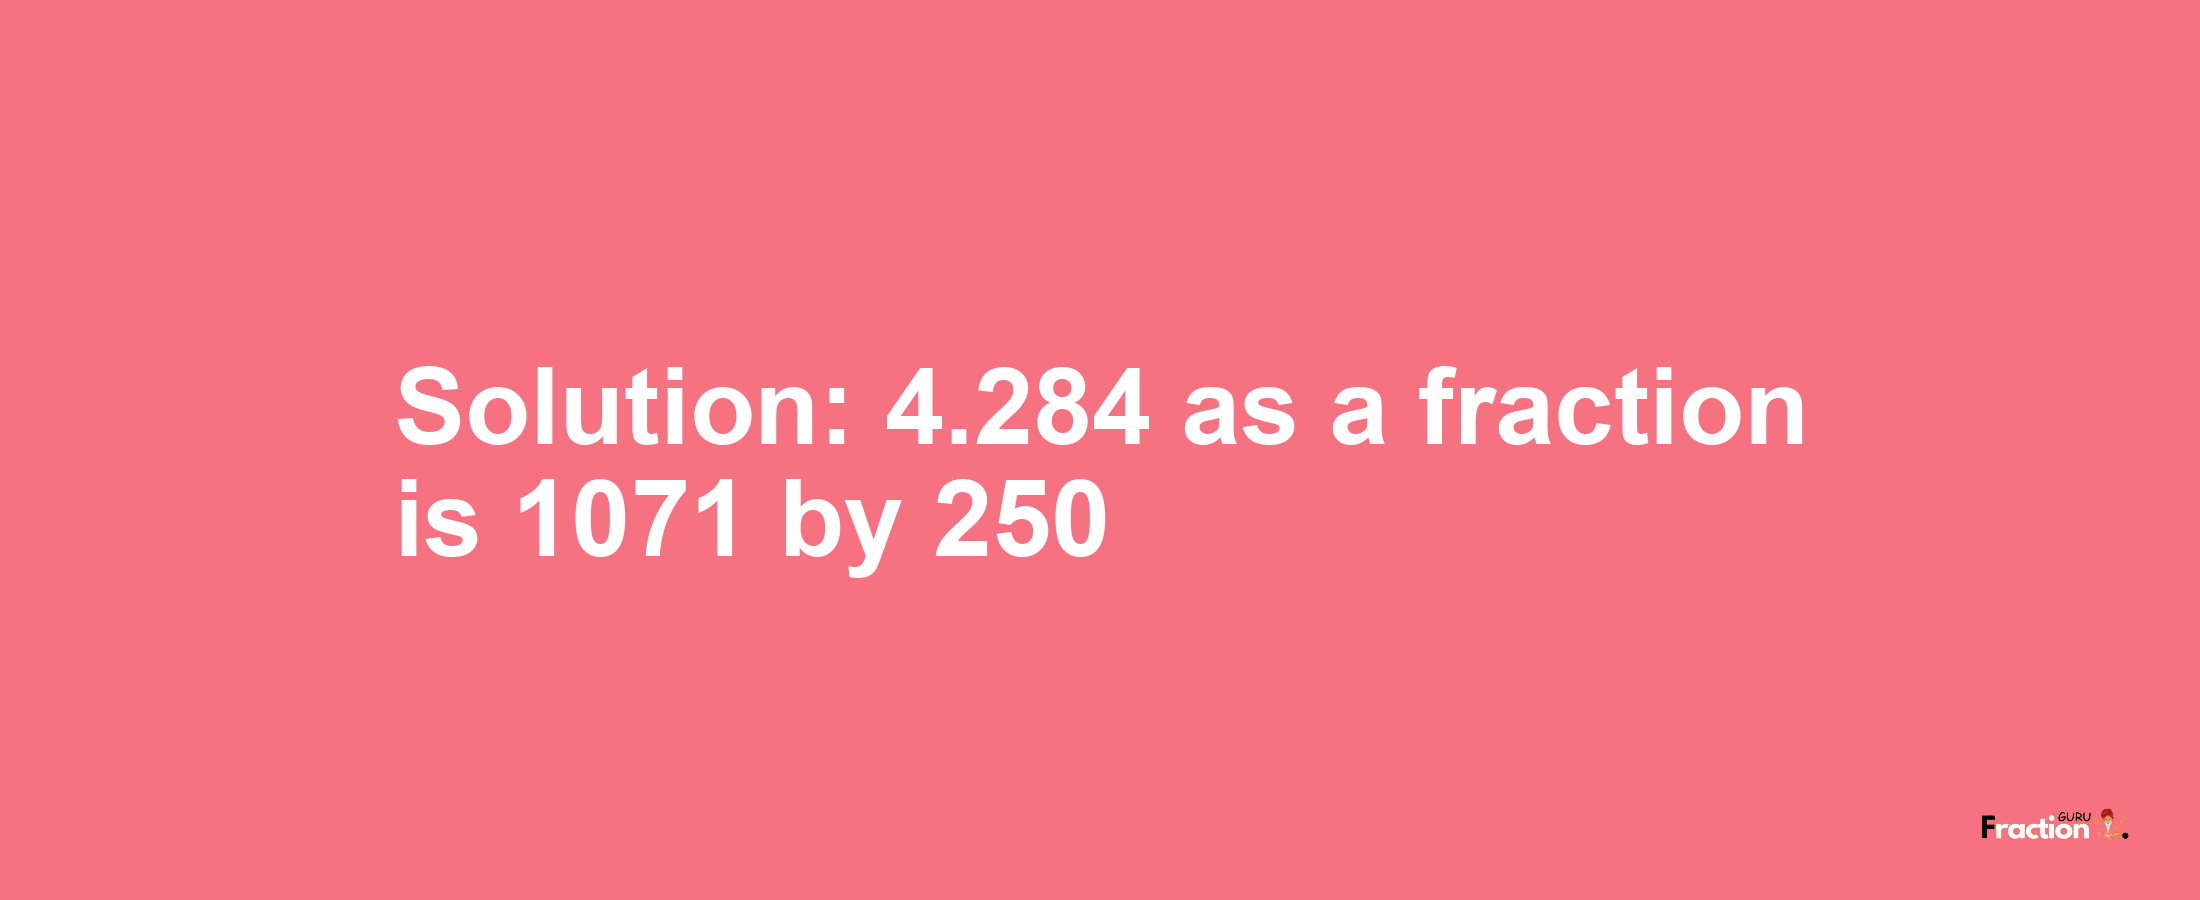 Solution:4.284 as a fraction is 1071/250